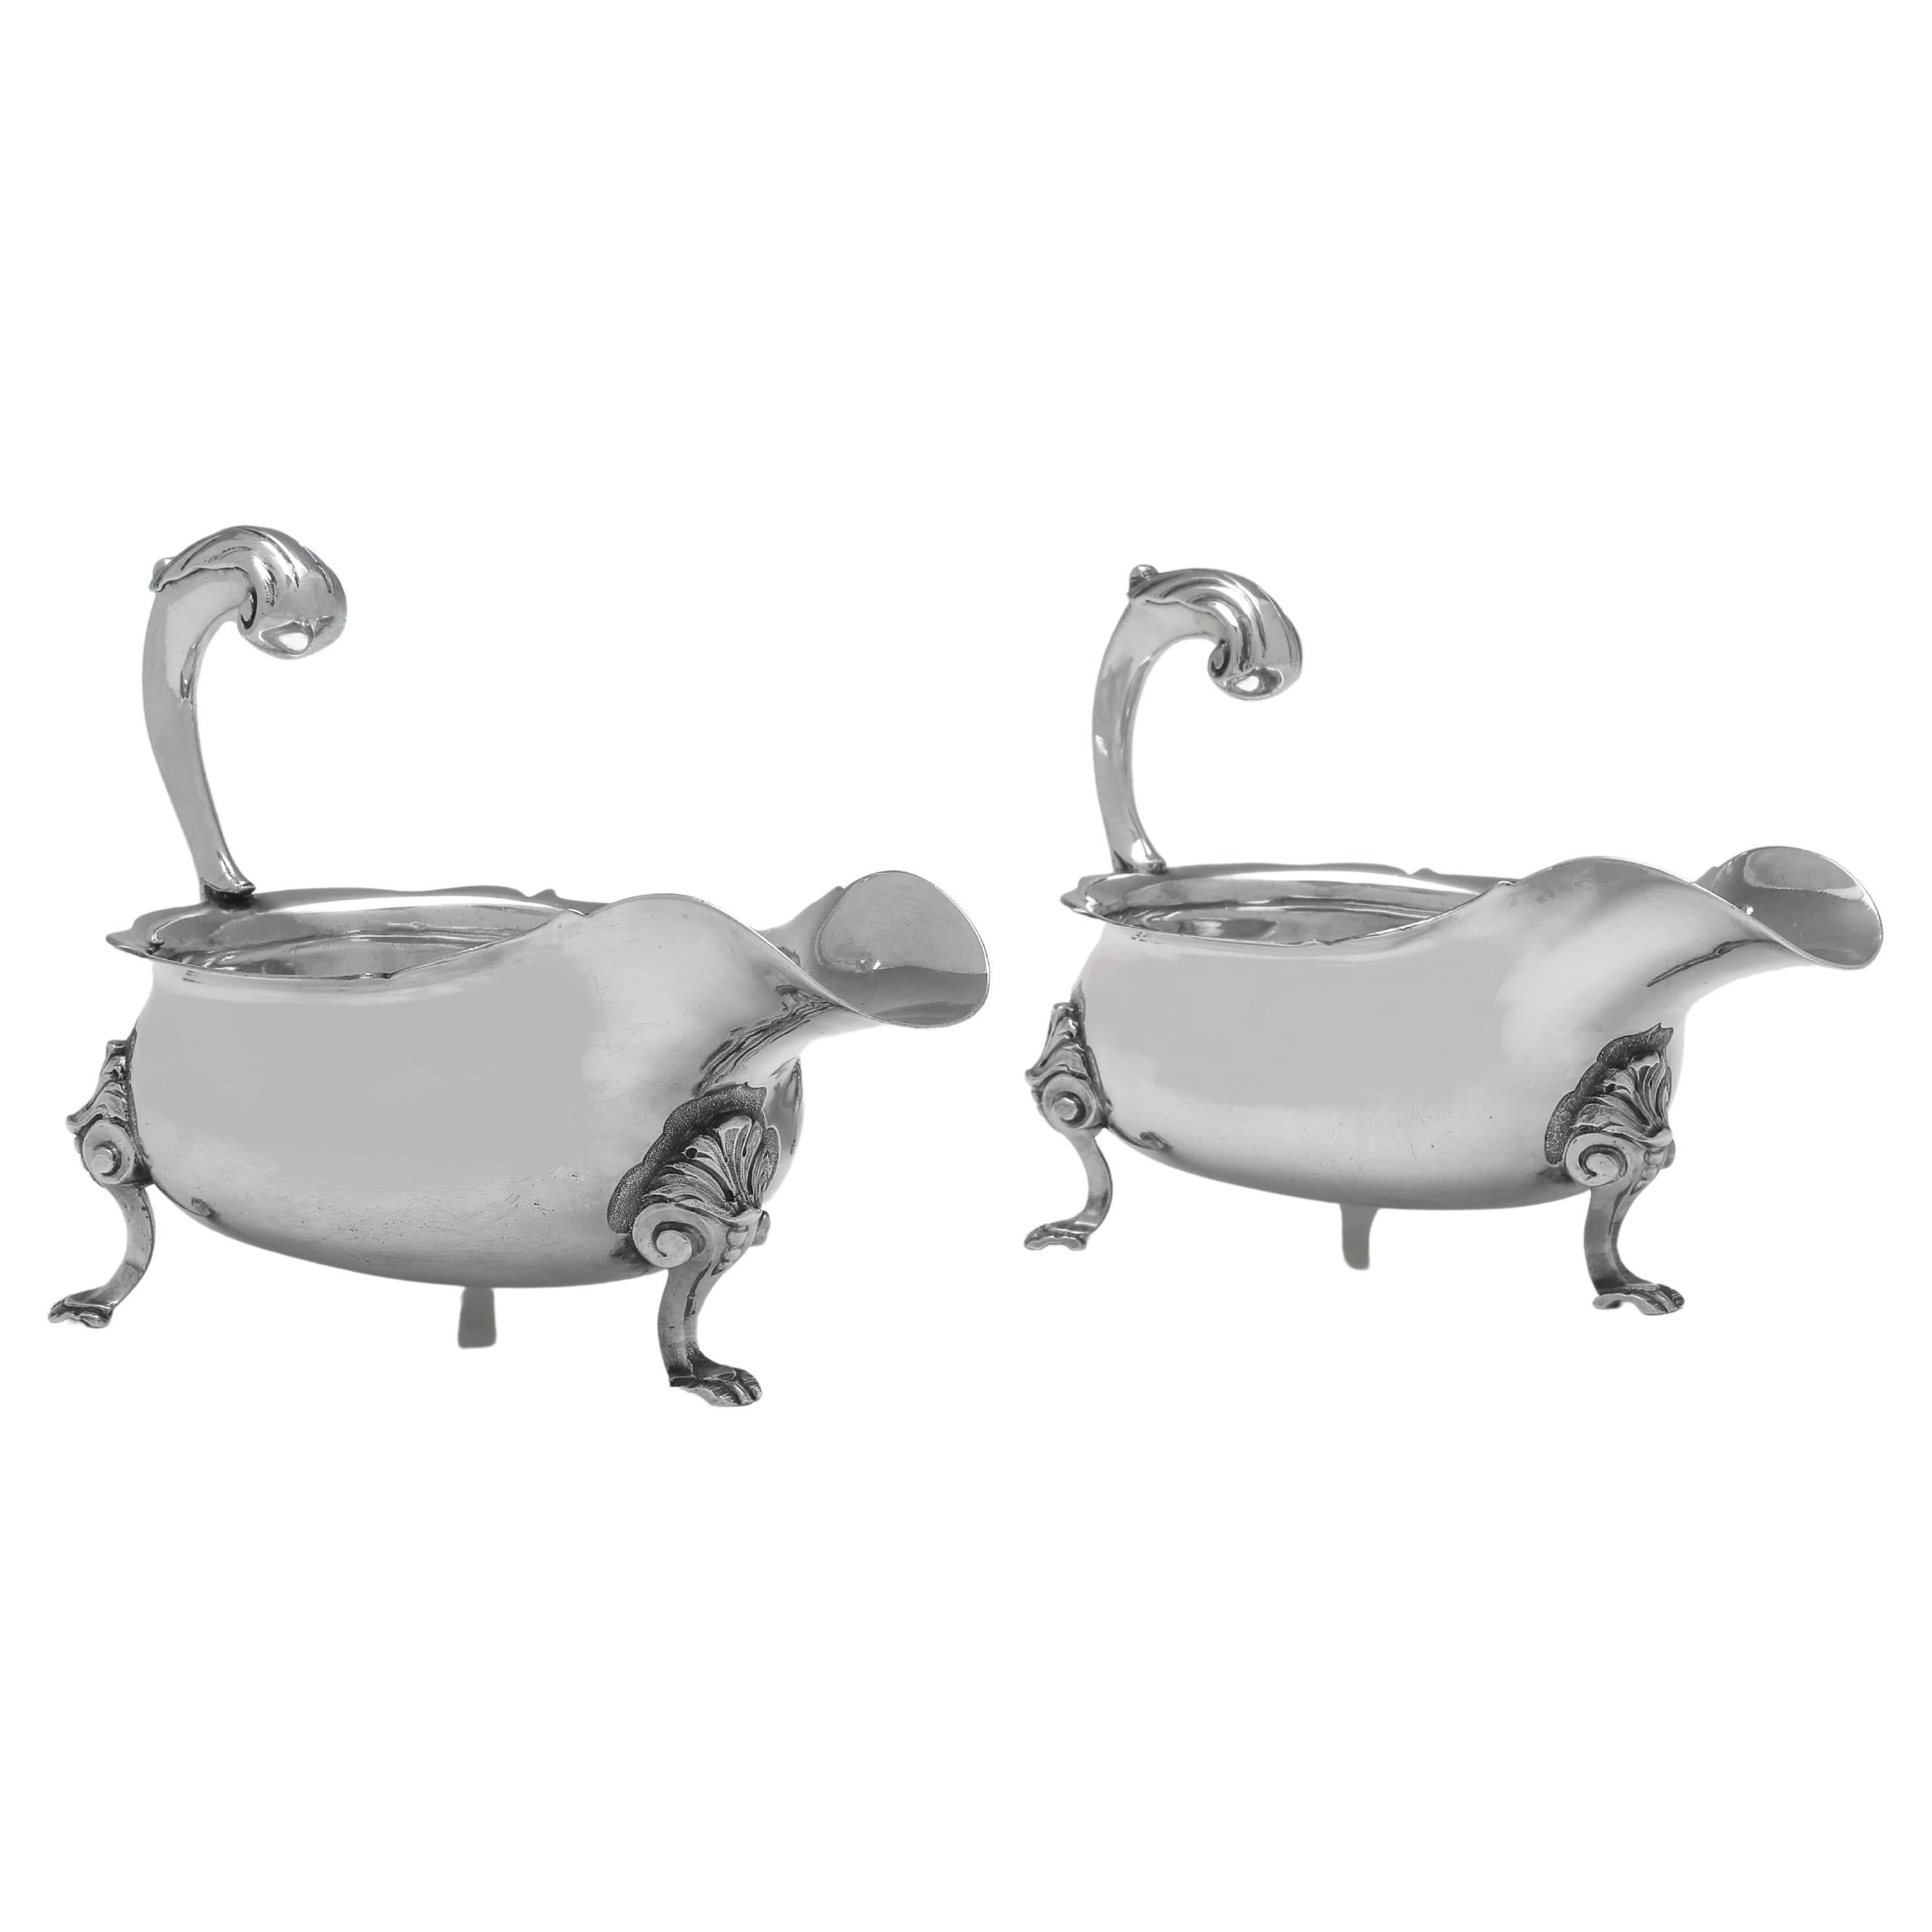 Rococo Period George II Sterling Silver Pair Of Sauce Boats, London 1740